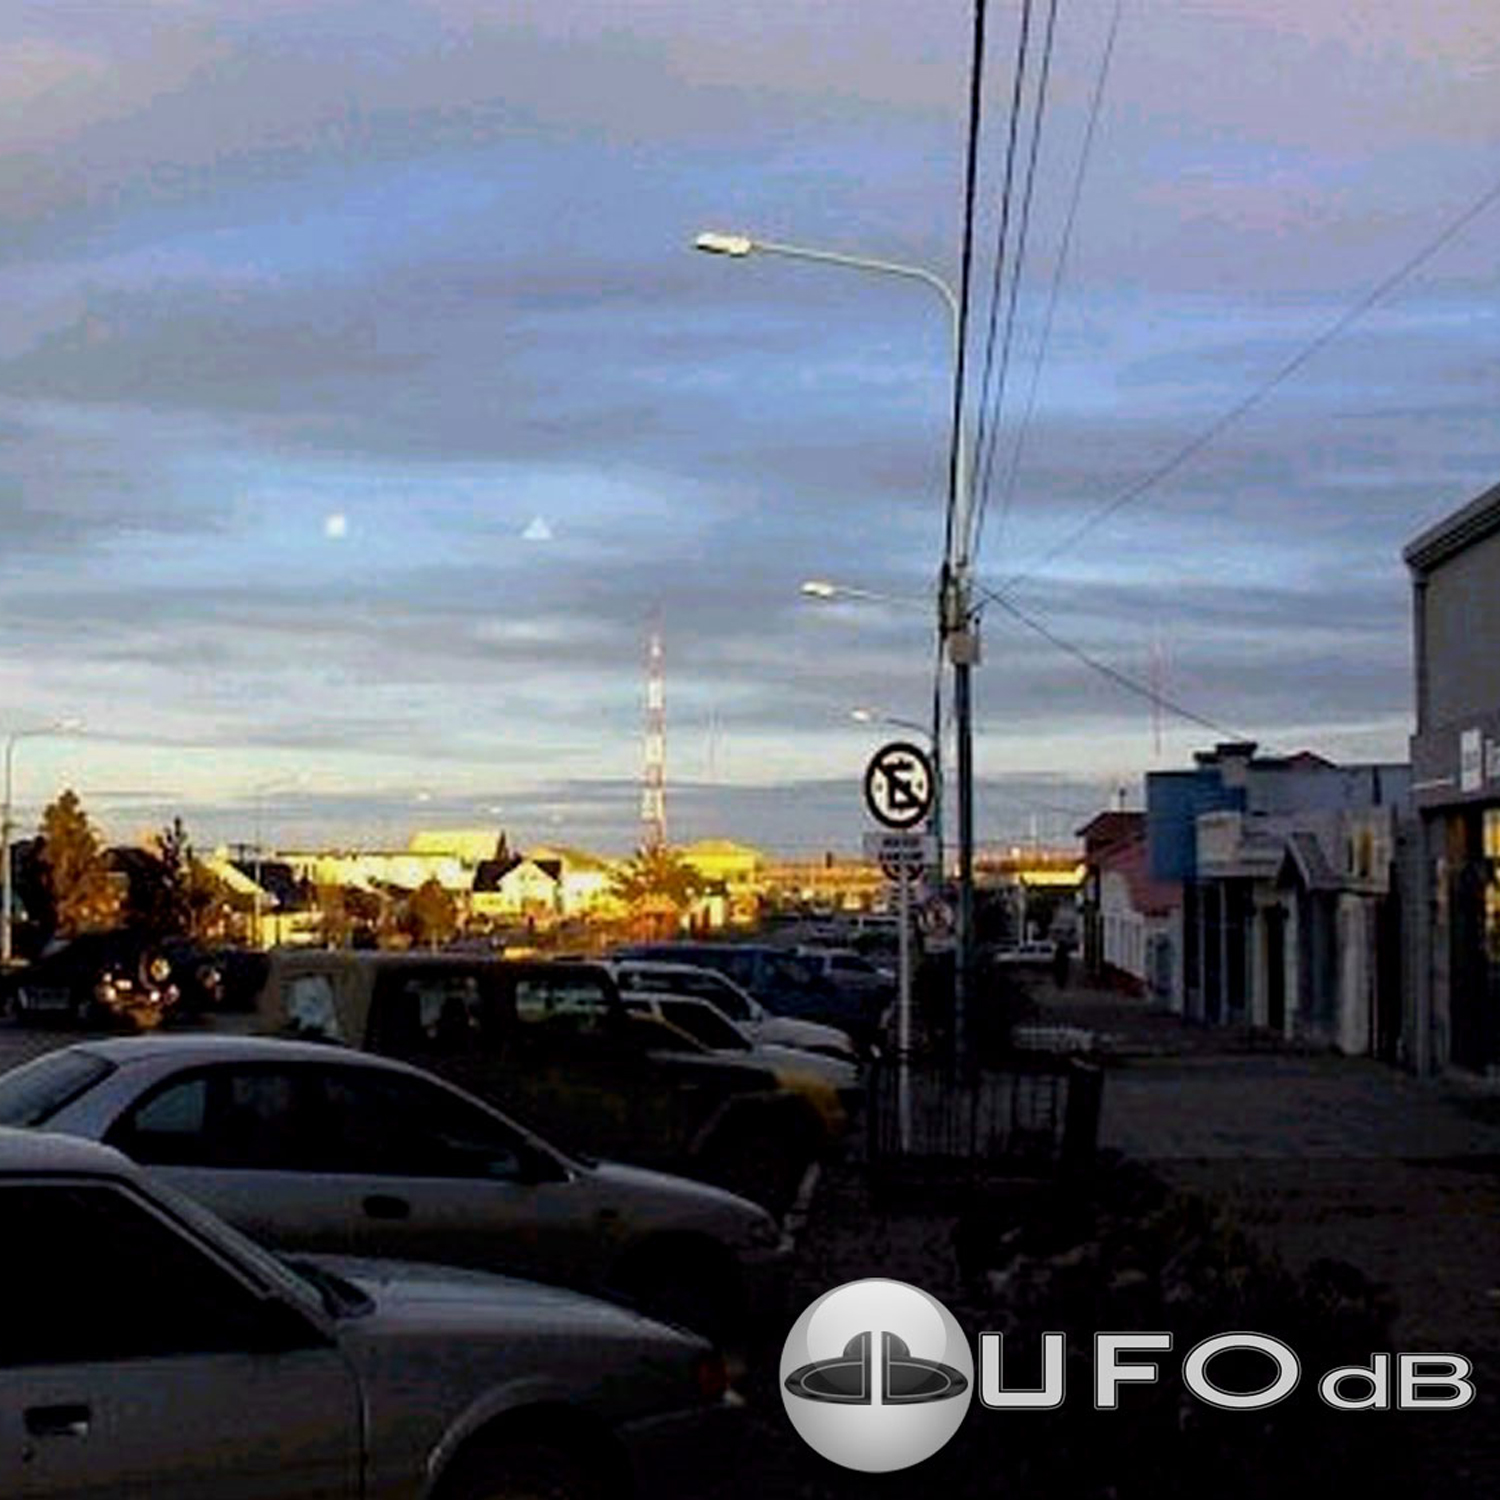 UFO seen at the end of the south American continent Tierra del Fuego UFO Picture #26-2